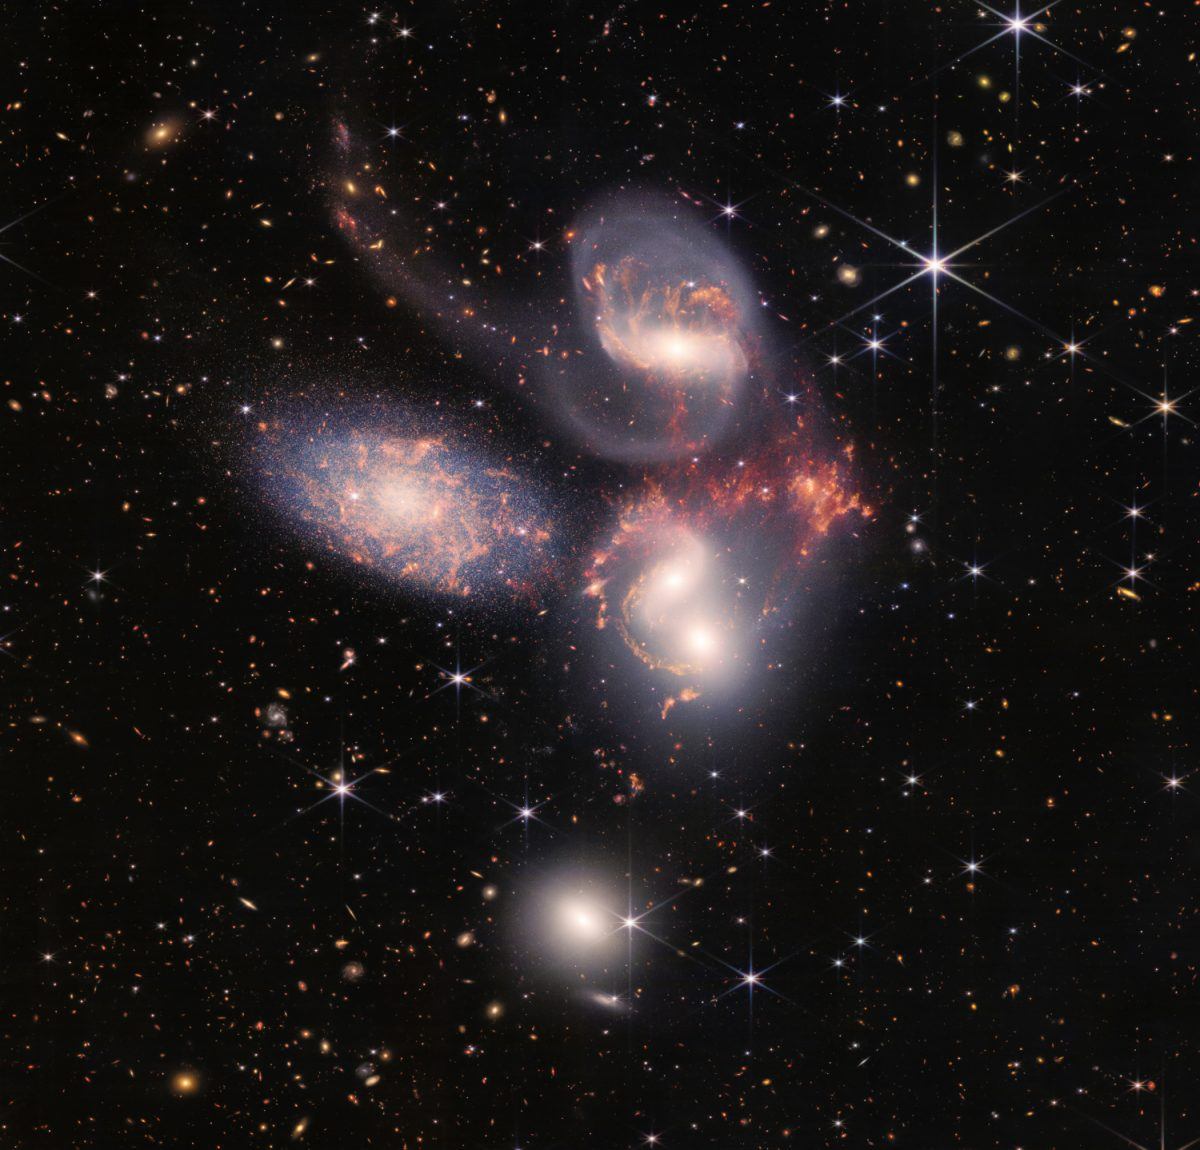 A group of five galaxies next to each other, with other stars and galaxies visible in the far distance.